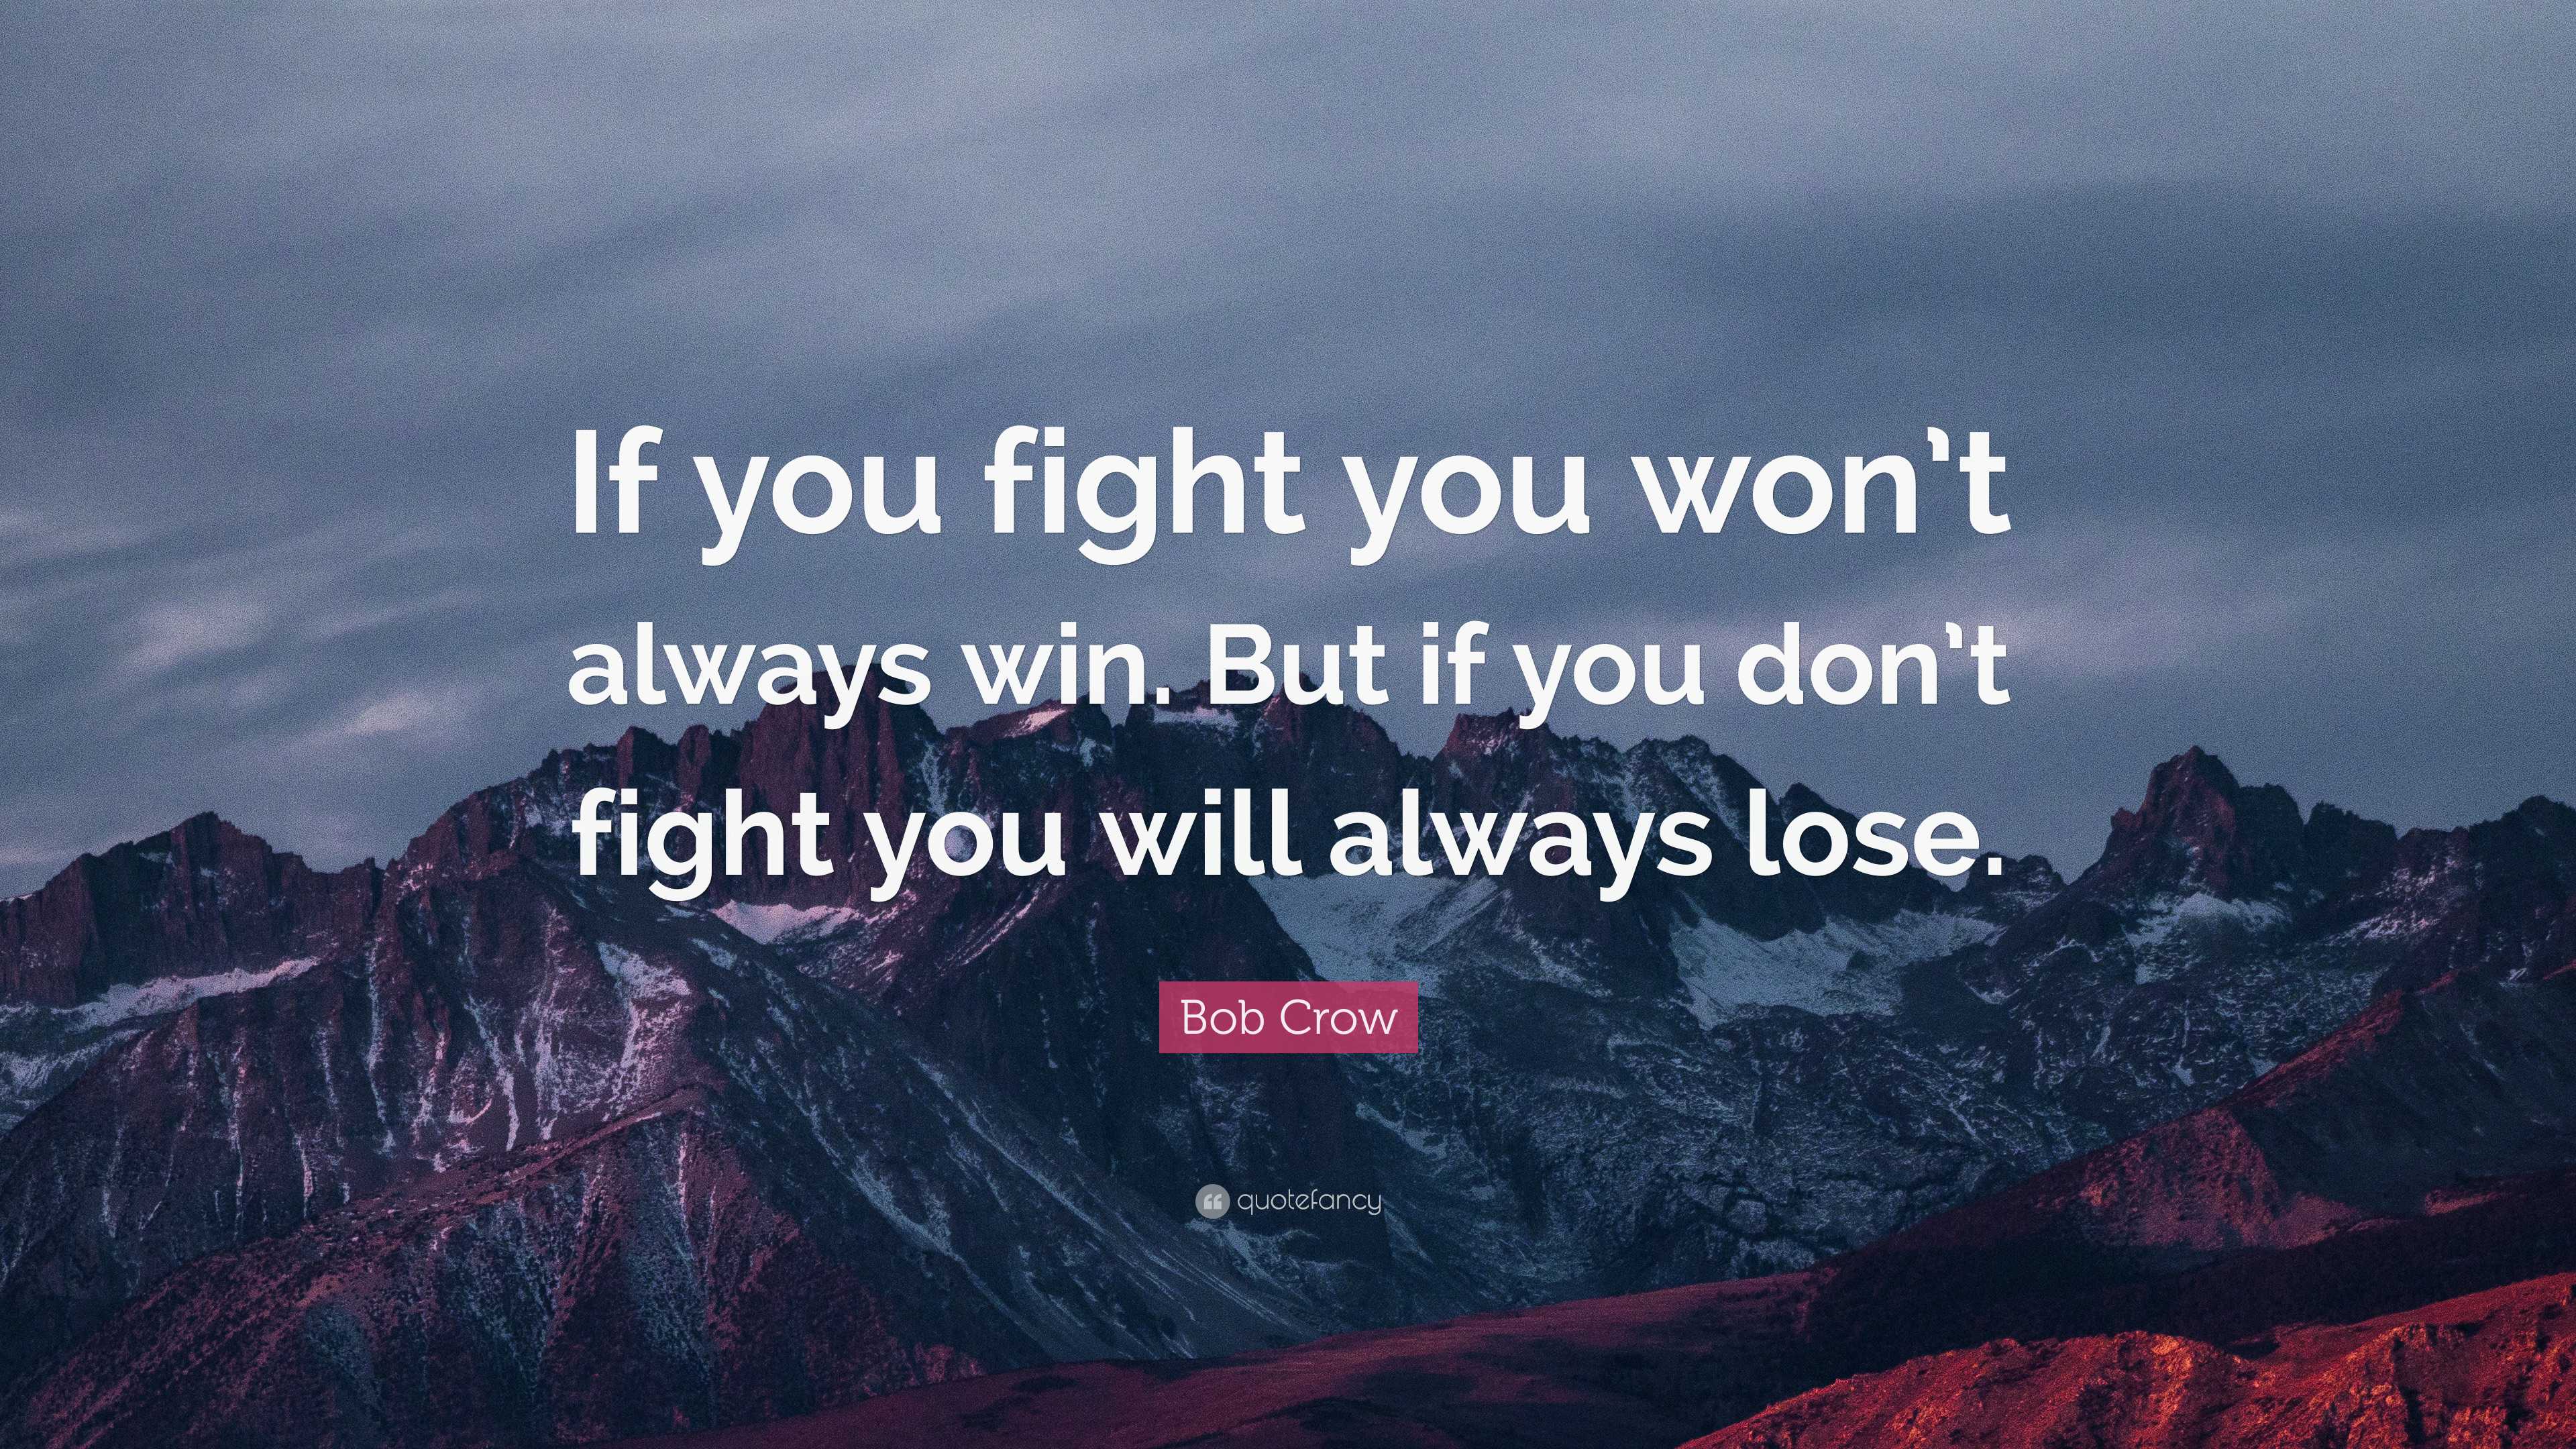 Bob Crow Quote “if You Fight You Won’t Always Win But If You Don’t Fight You Will Always Lose ”